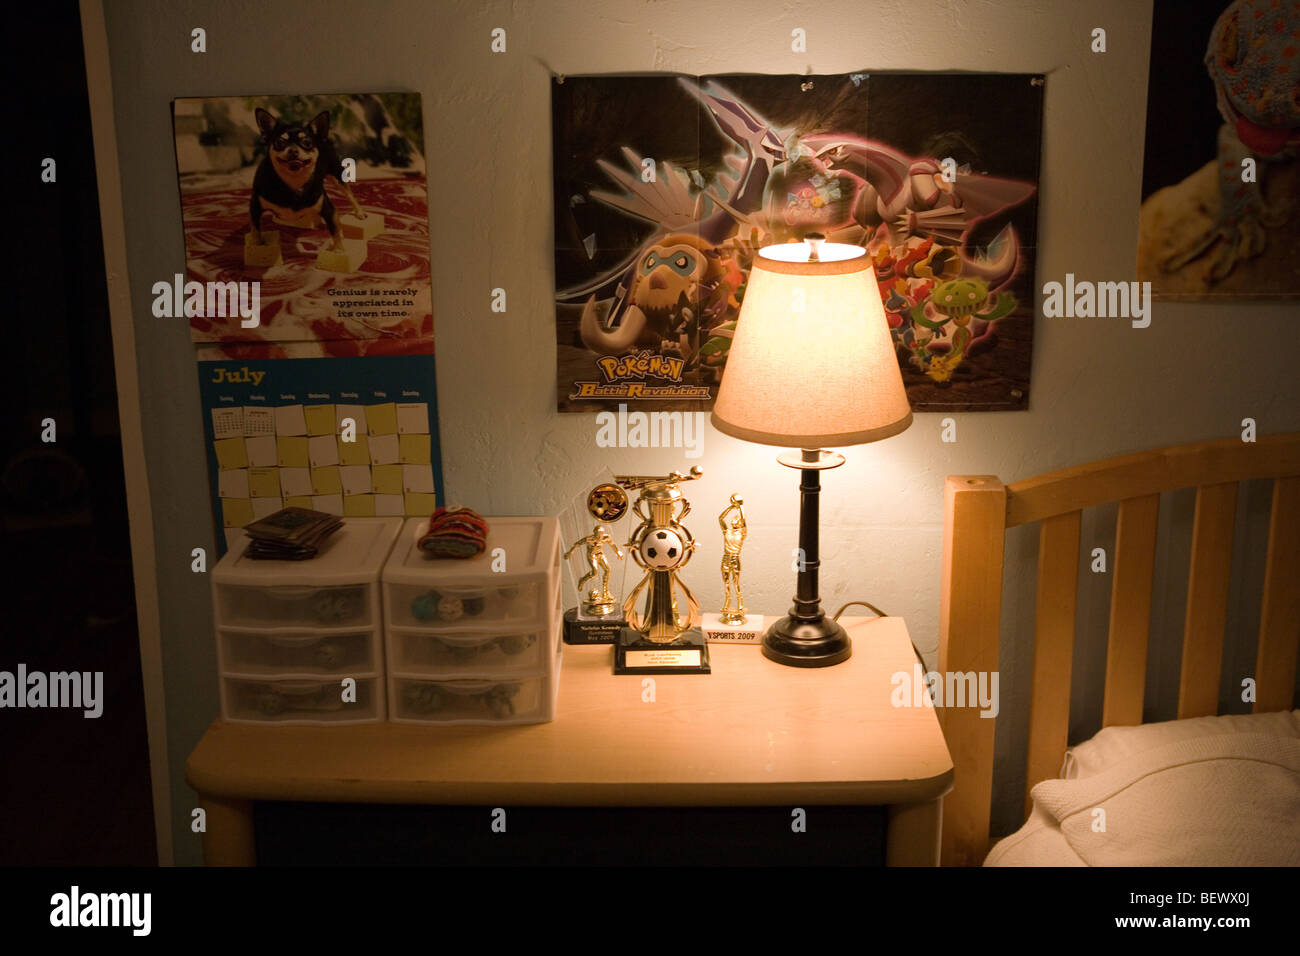 wall of seven year old American boy's bedroom, with posters, soccer trophee and lamp Stock Photo